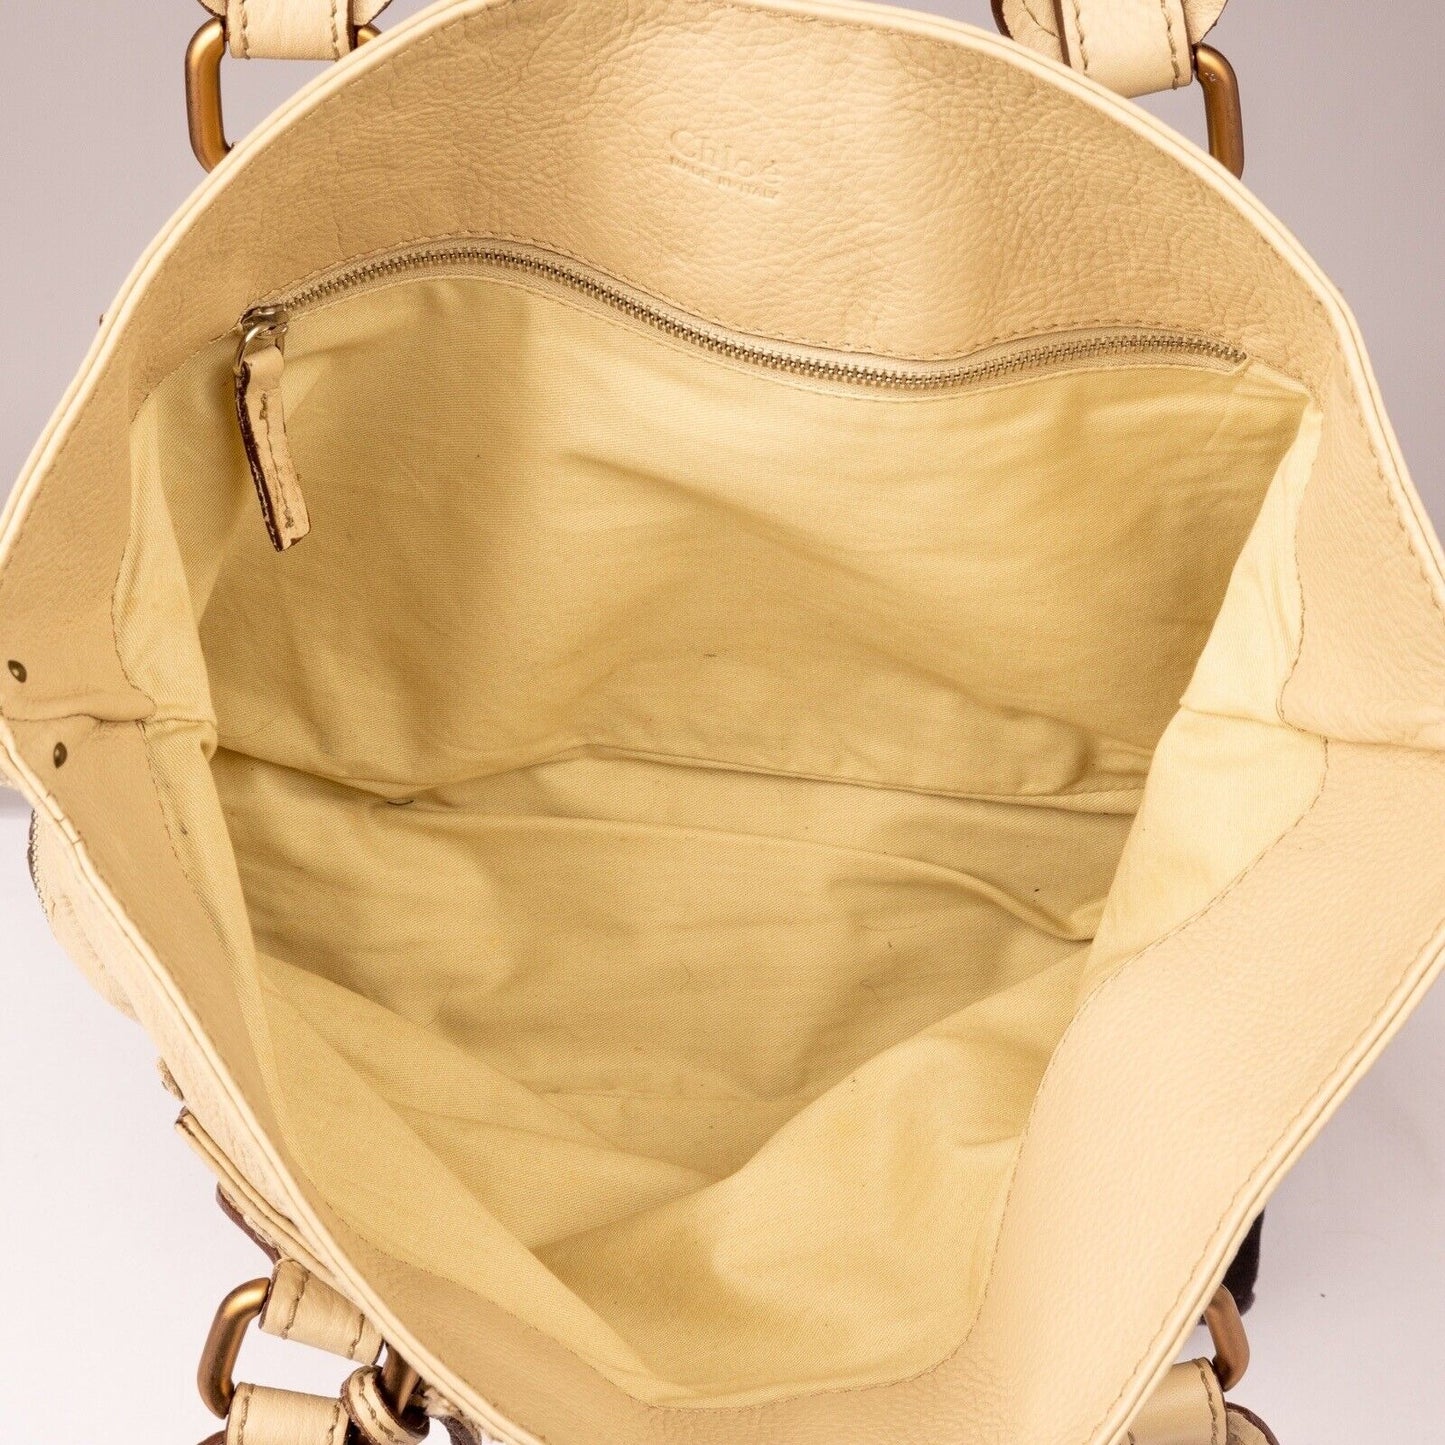 Inside View Of Large Cream Tote Bag